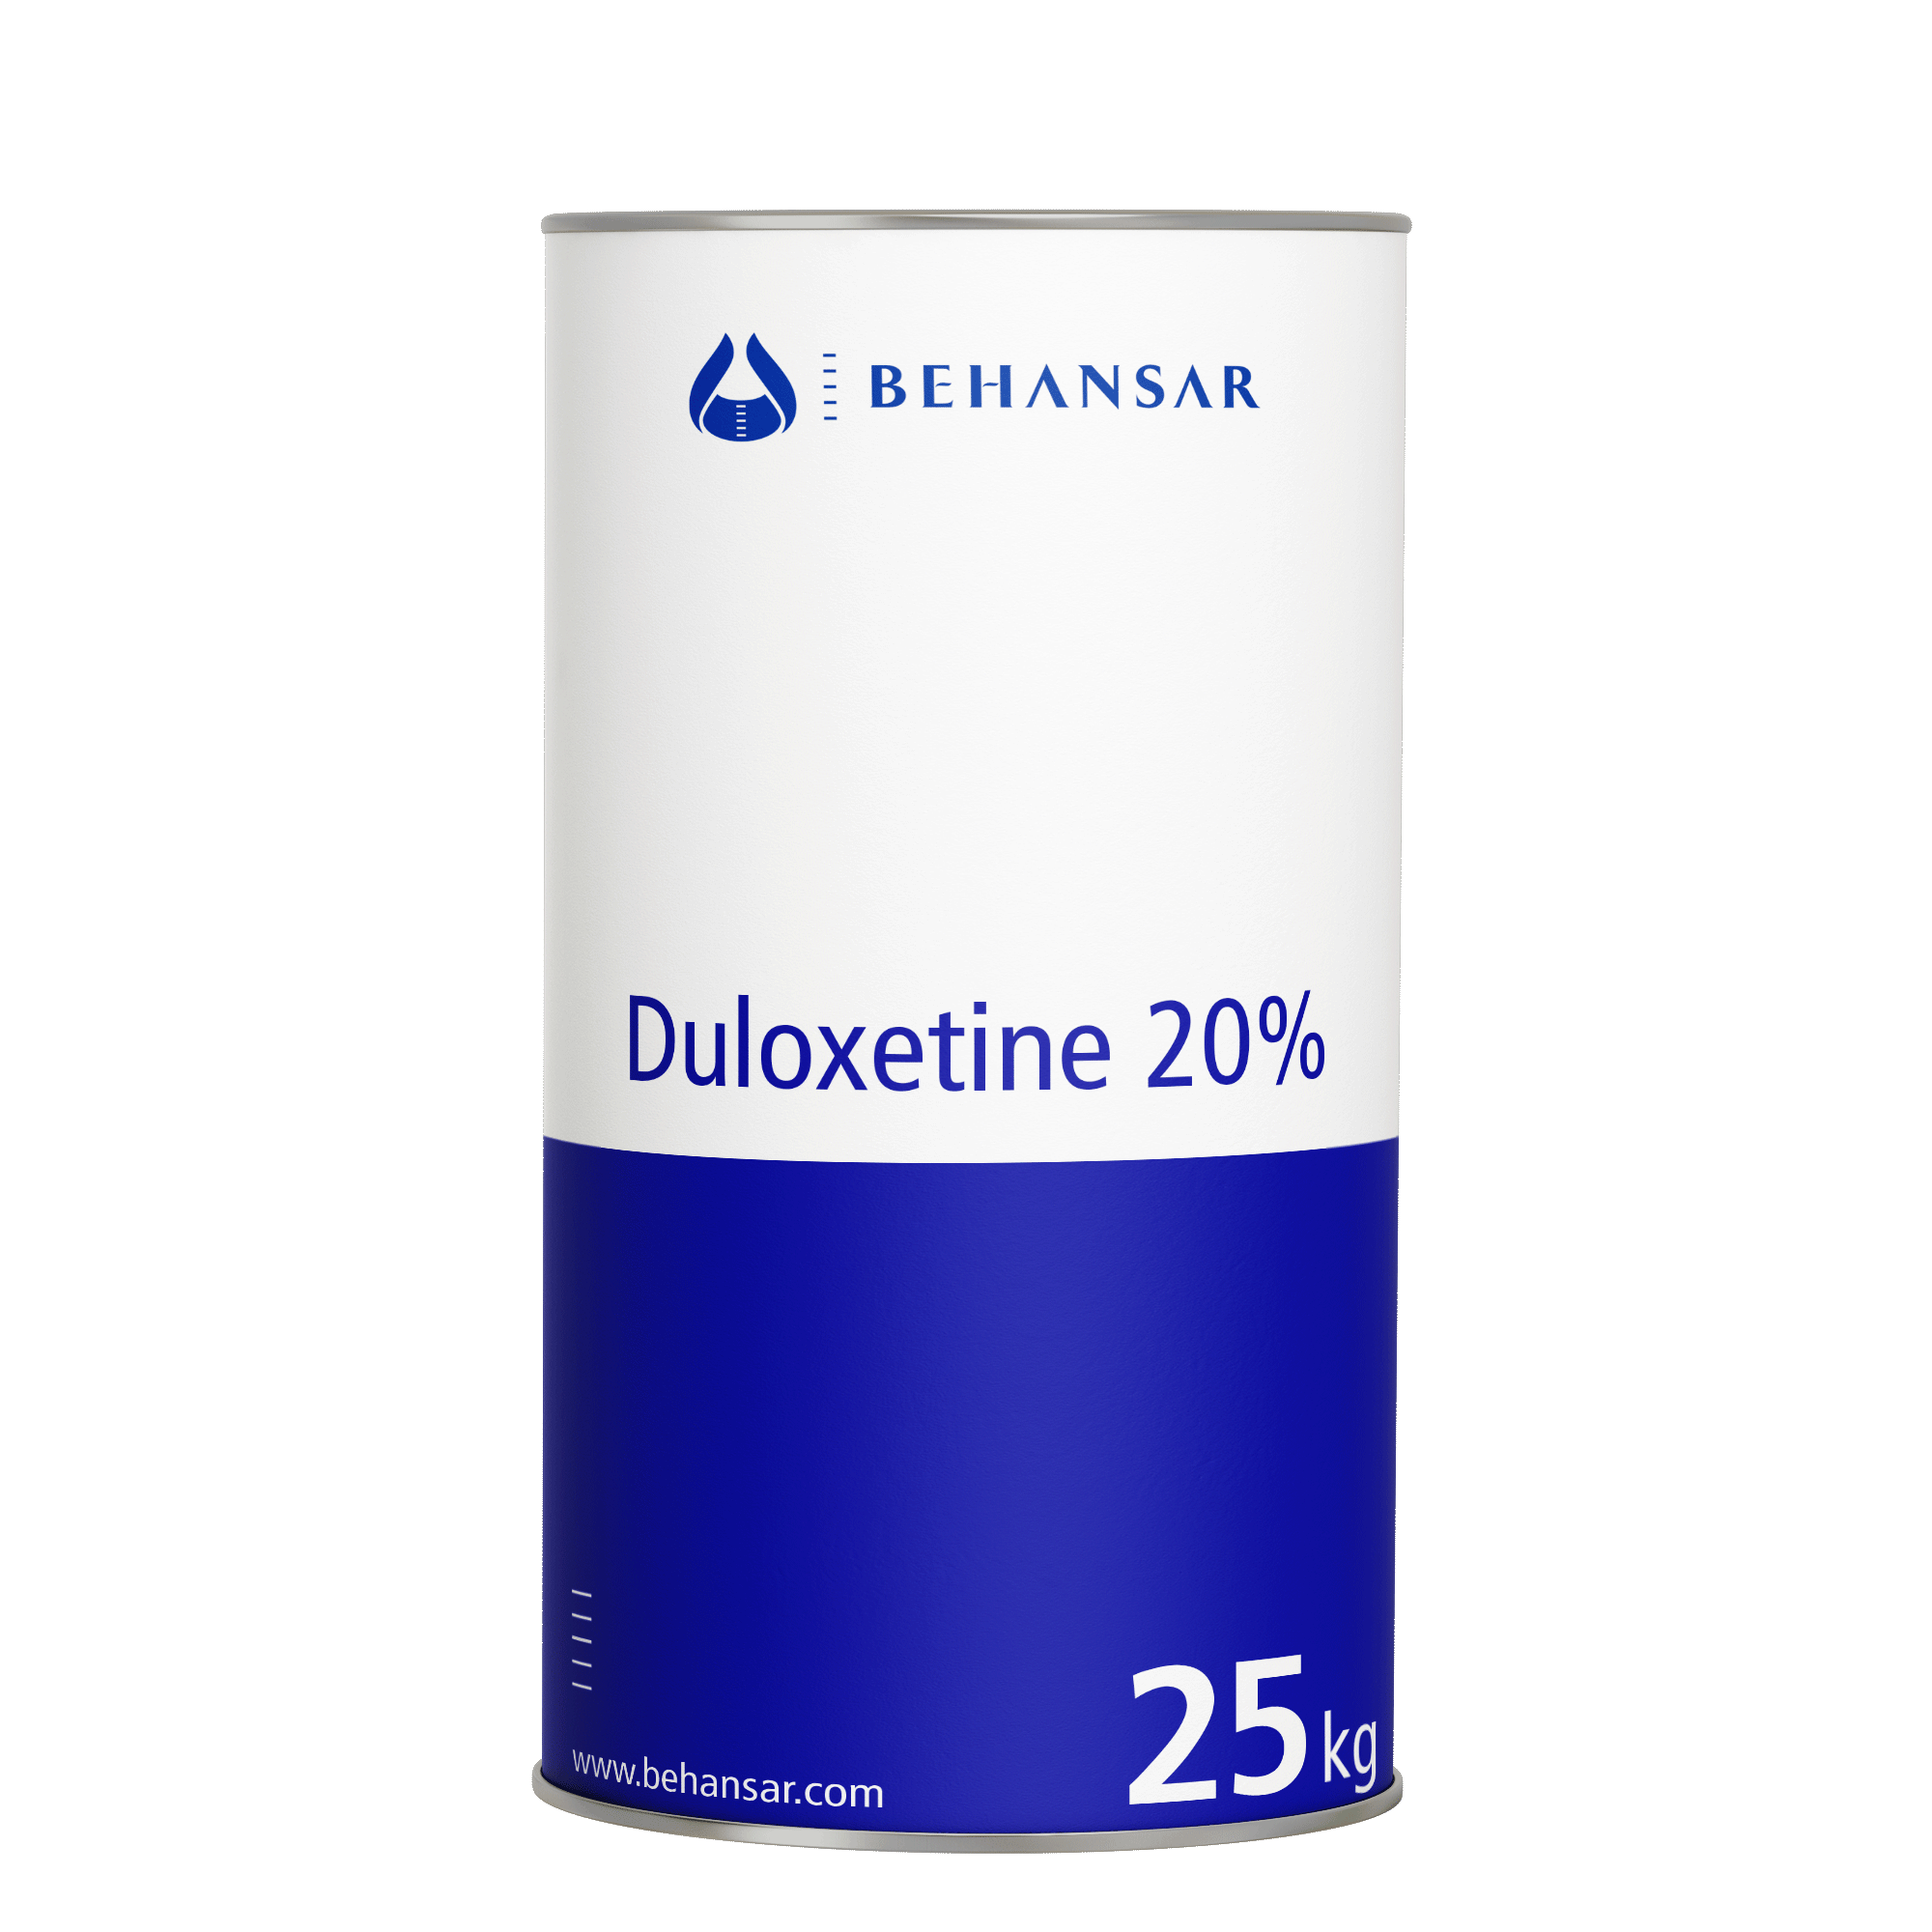 Duloxetine 20% is one of the products of Behansar Co